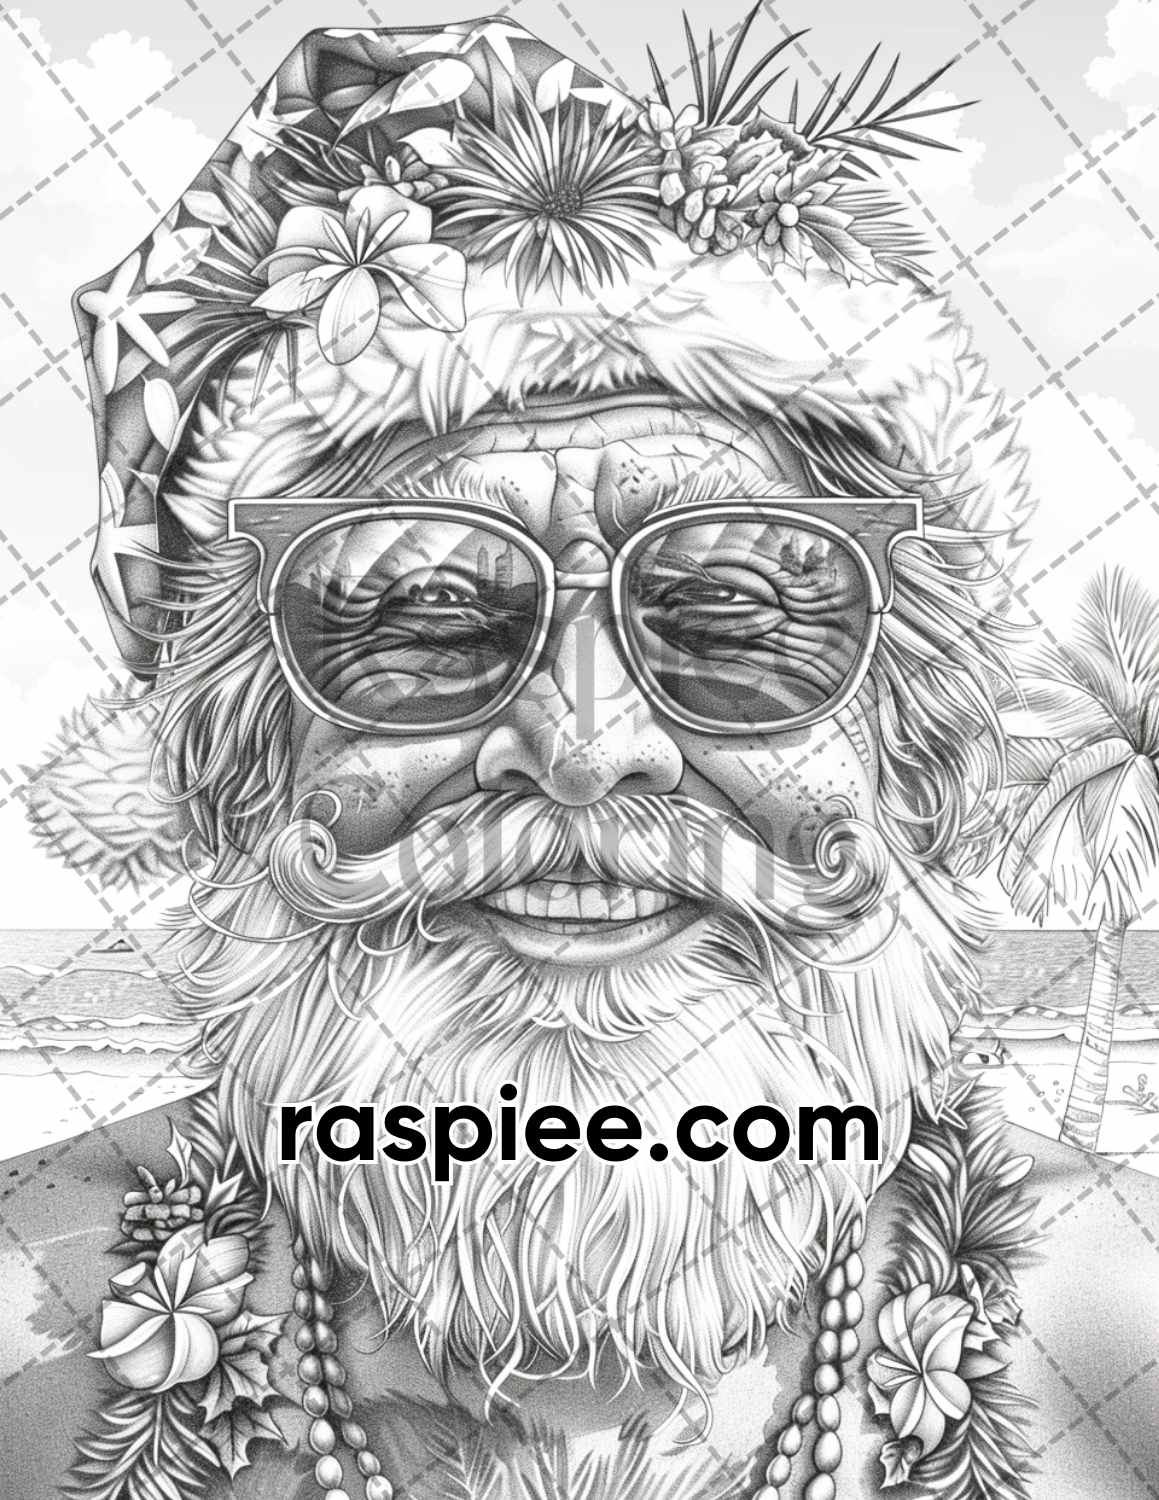 adult coloring pages, adult coloring sheets, adult coloring book pdf, adult coloring book printable, grayscale coloring pages, grayscale coloring books, chriatmas in july coloring pages for adults, santa claus coloring book, grayscale illustration